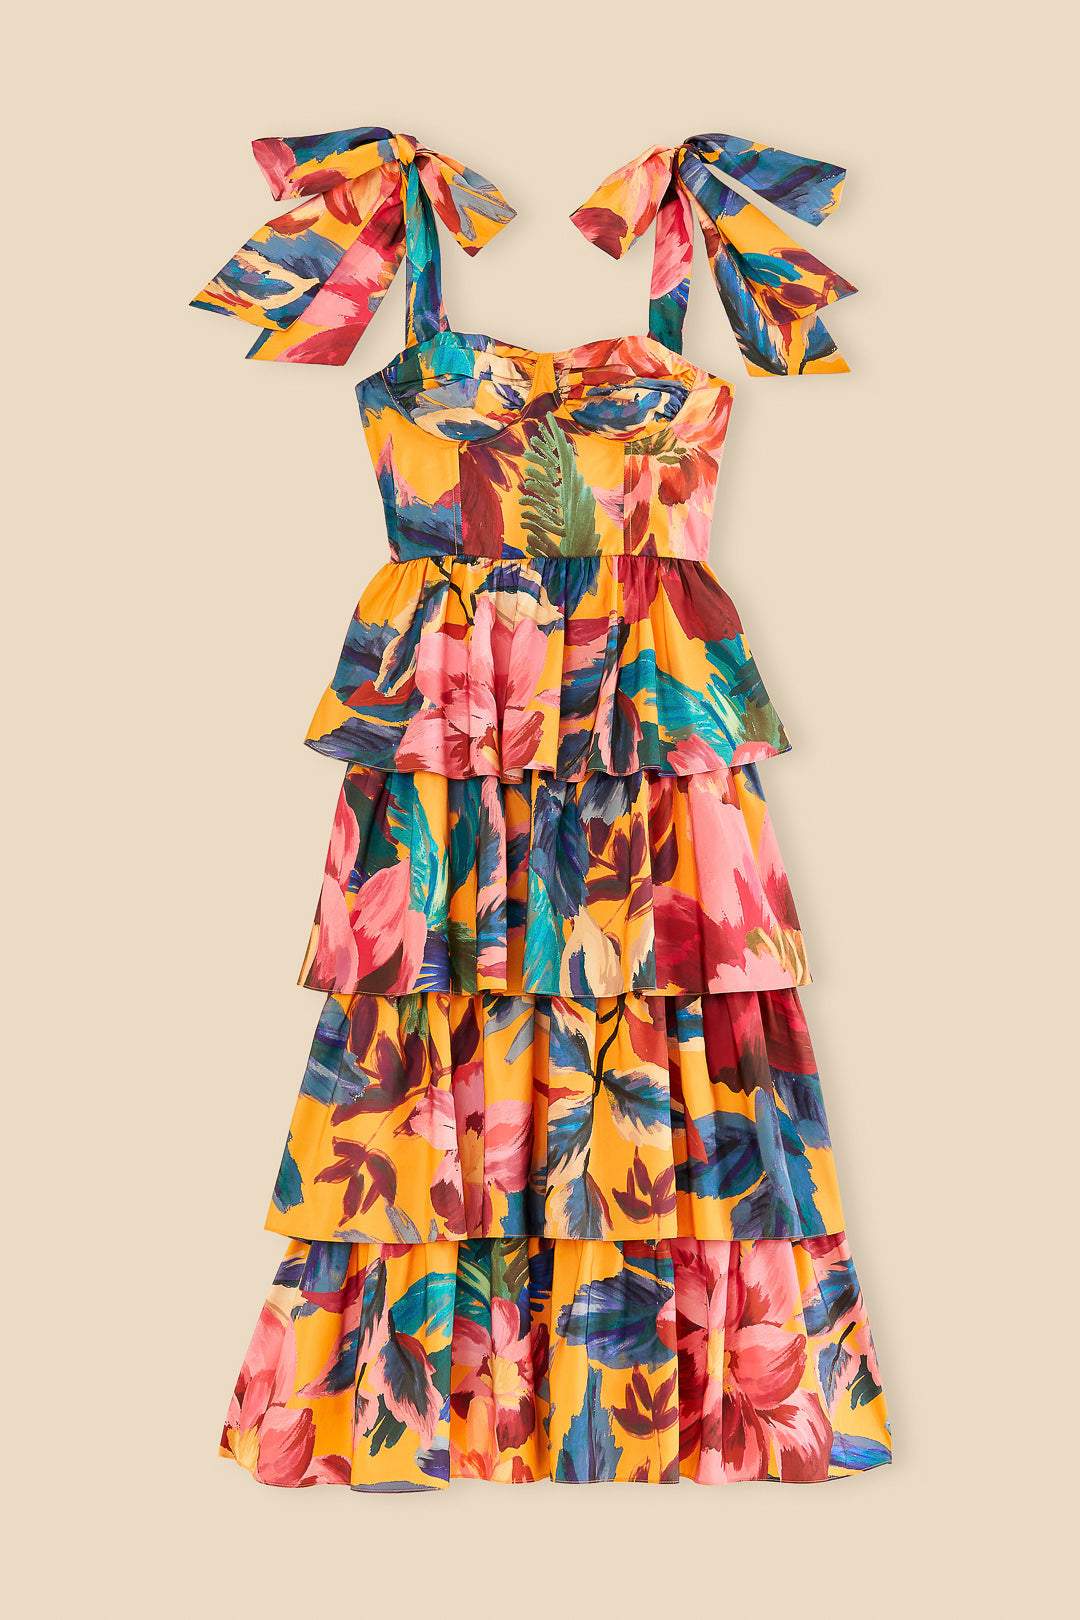 dresses-Aaliyah Floral Printed Maxi Strap Dress-SD00601262199-Multi-S - Sunfere